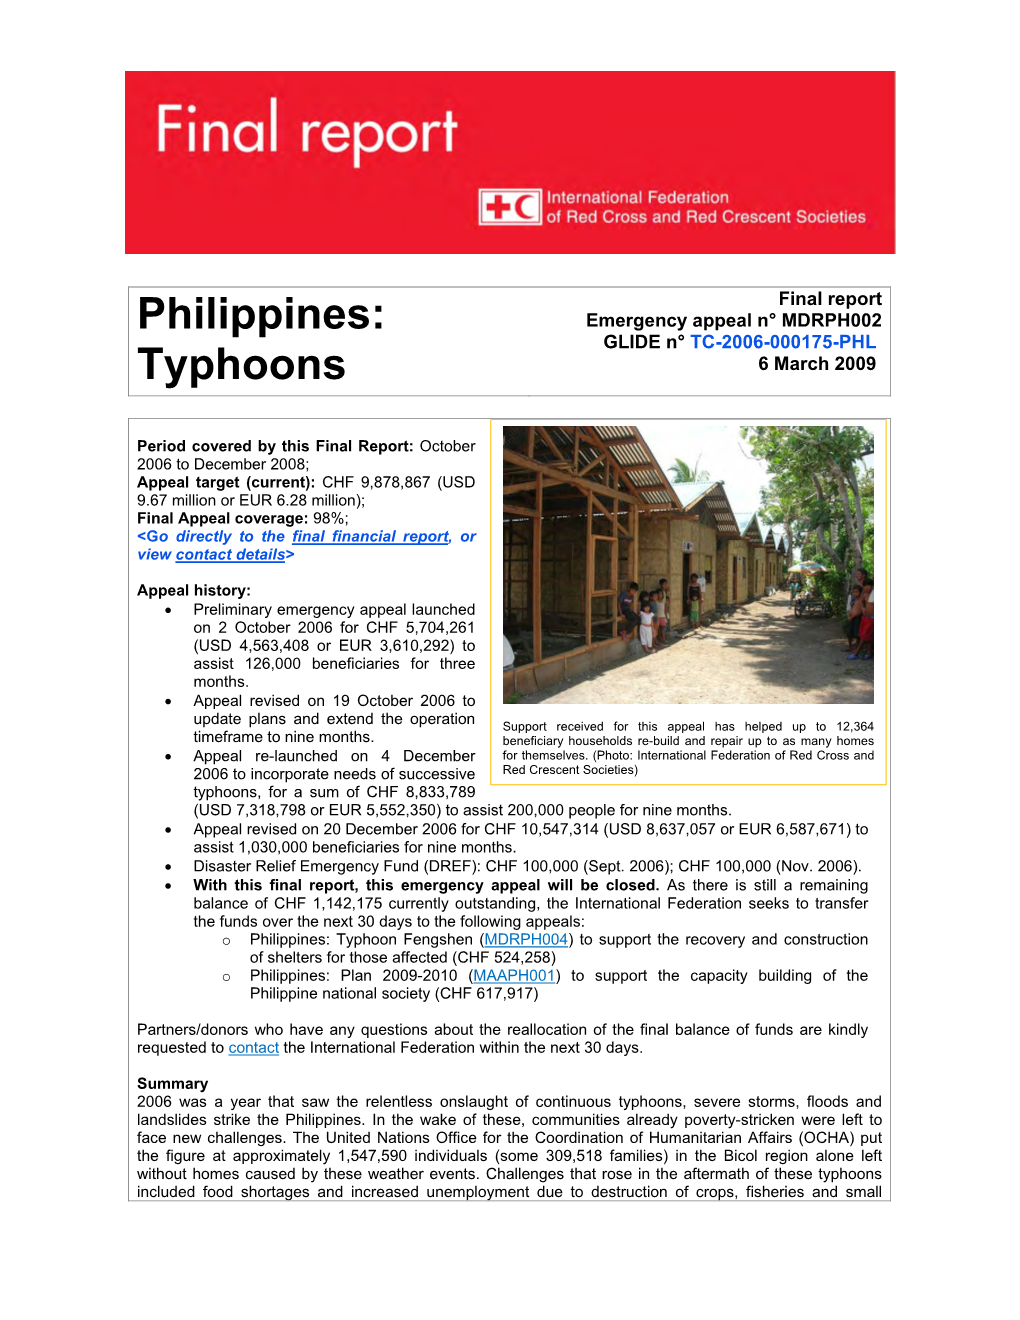 Philippines: Typhoons (MDRPH002) - Chronology of Events, 2006-2009